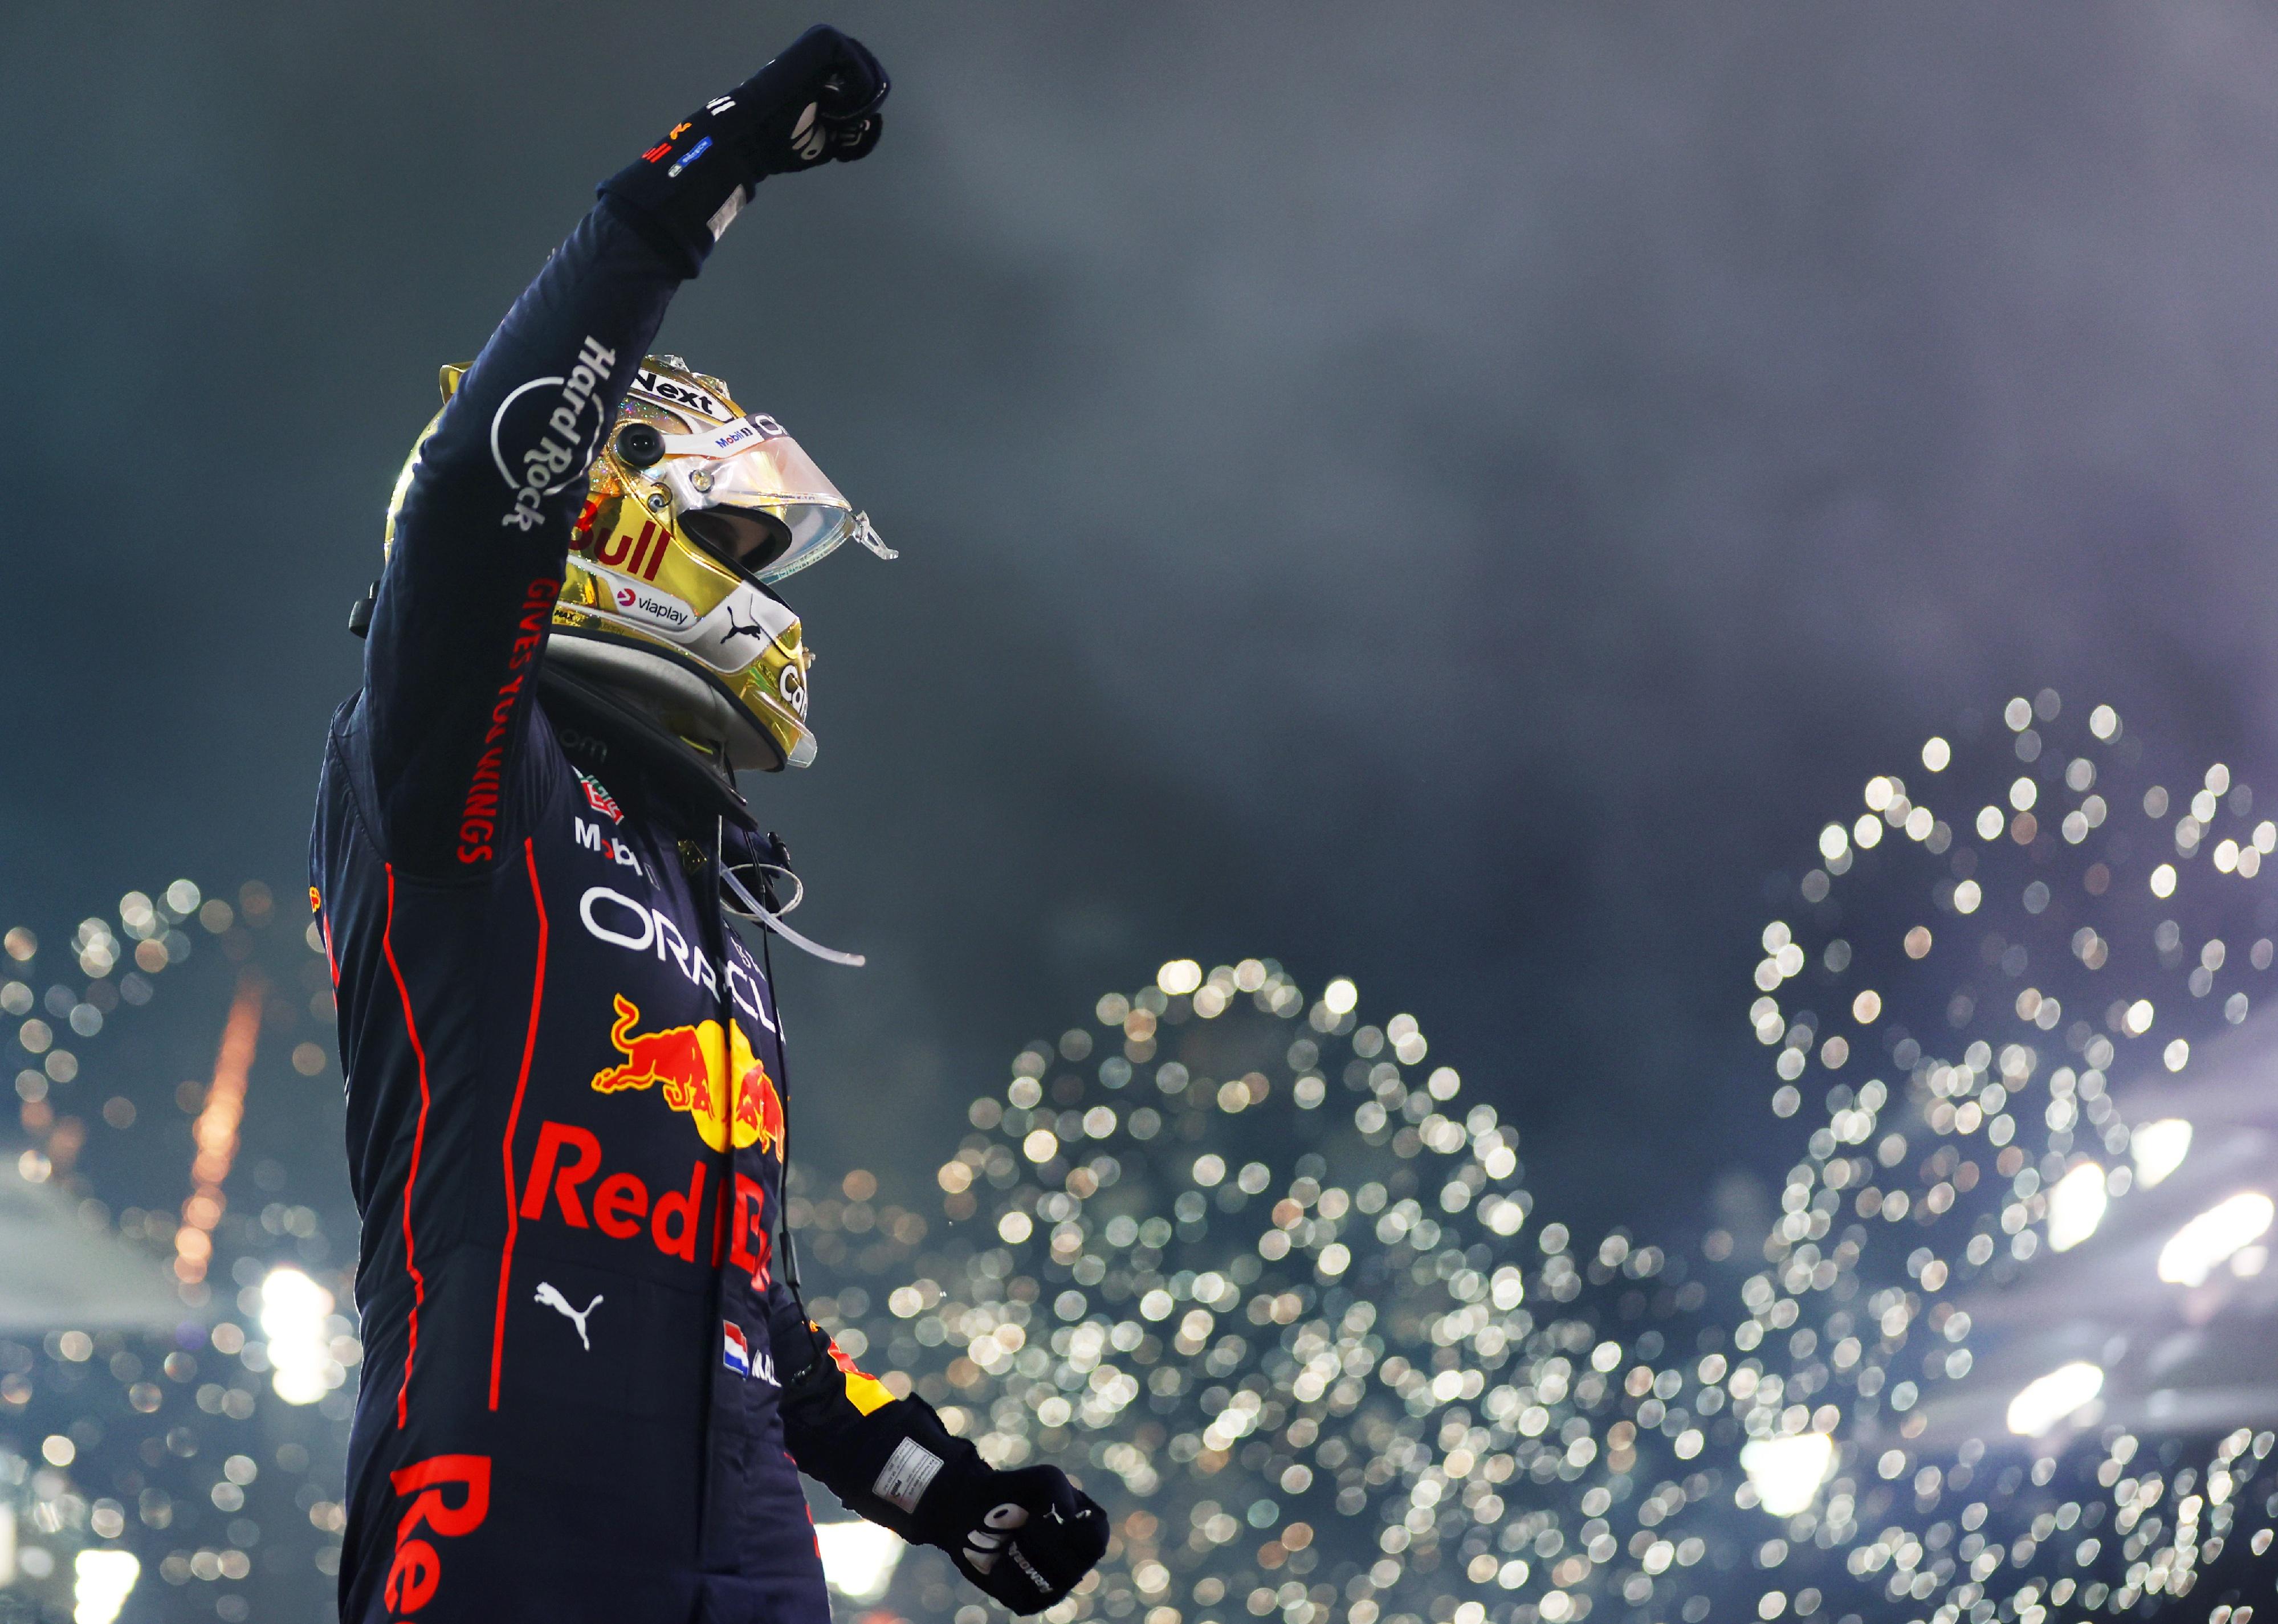 Max Verstappen celebrates in parc ferme during the F1 Grand Prix of Abu Dhabi.